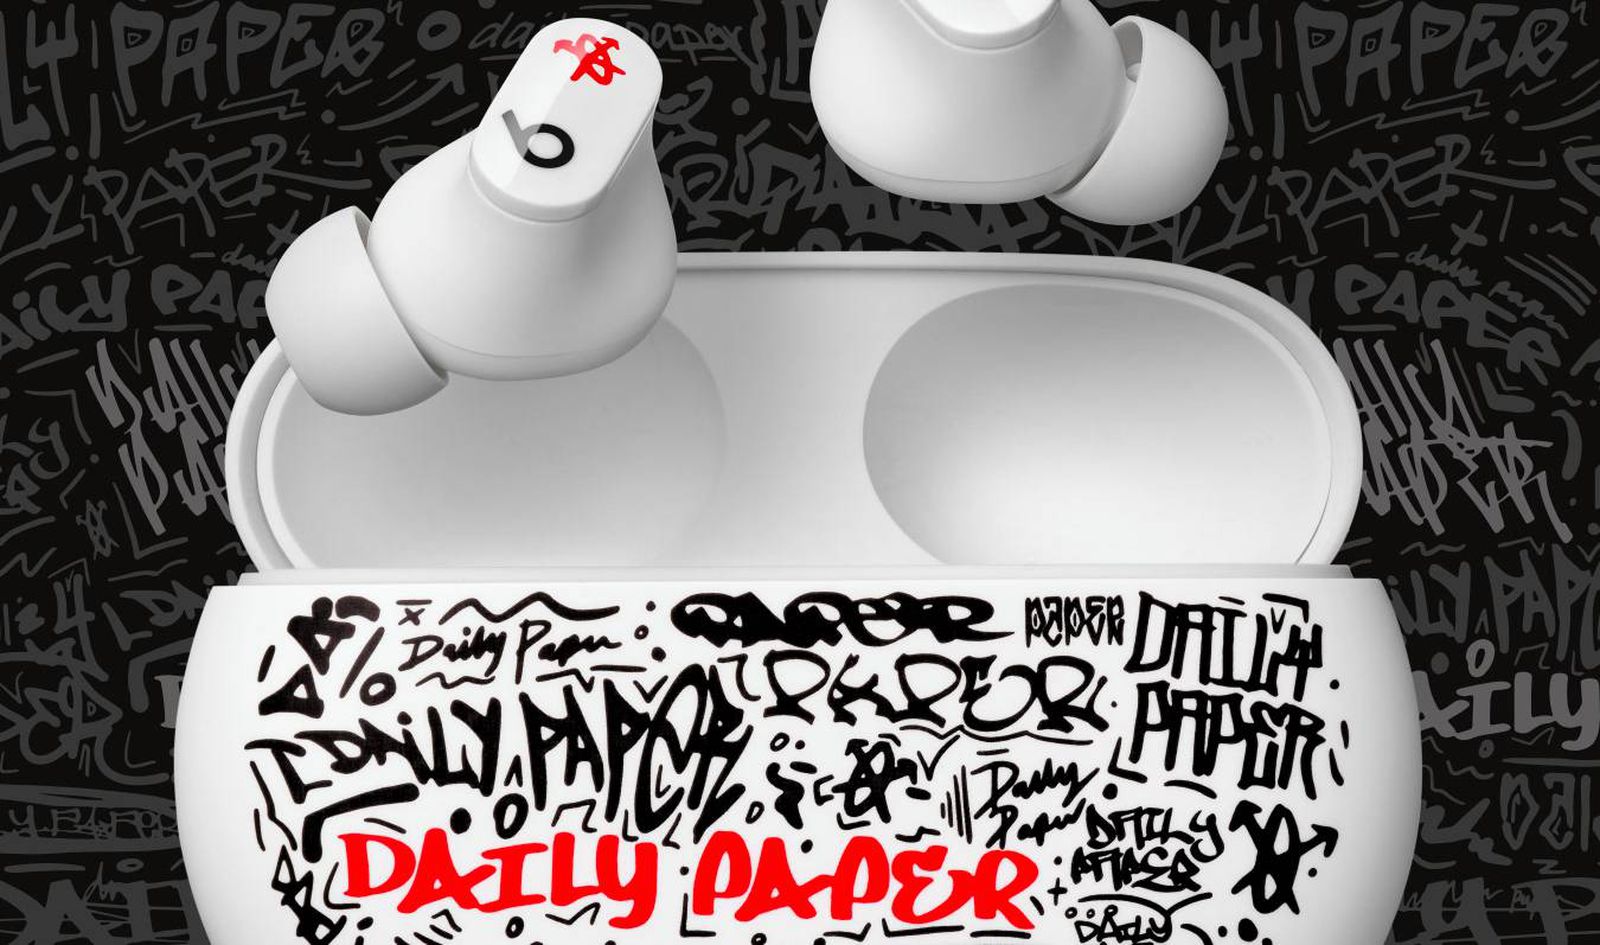 Beats Unveils Limited-Edition Studio Buds in Collaboration With Fashion Brand 'Daily Paper' - macrumors.com